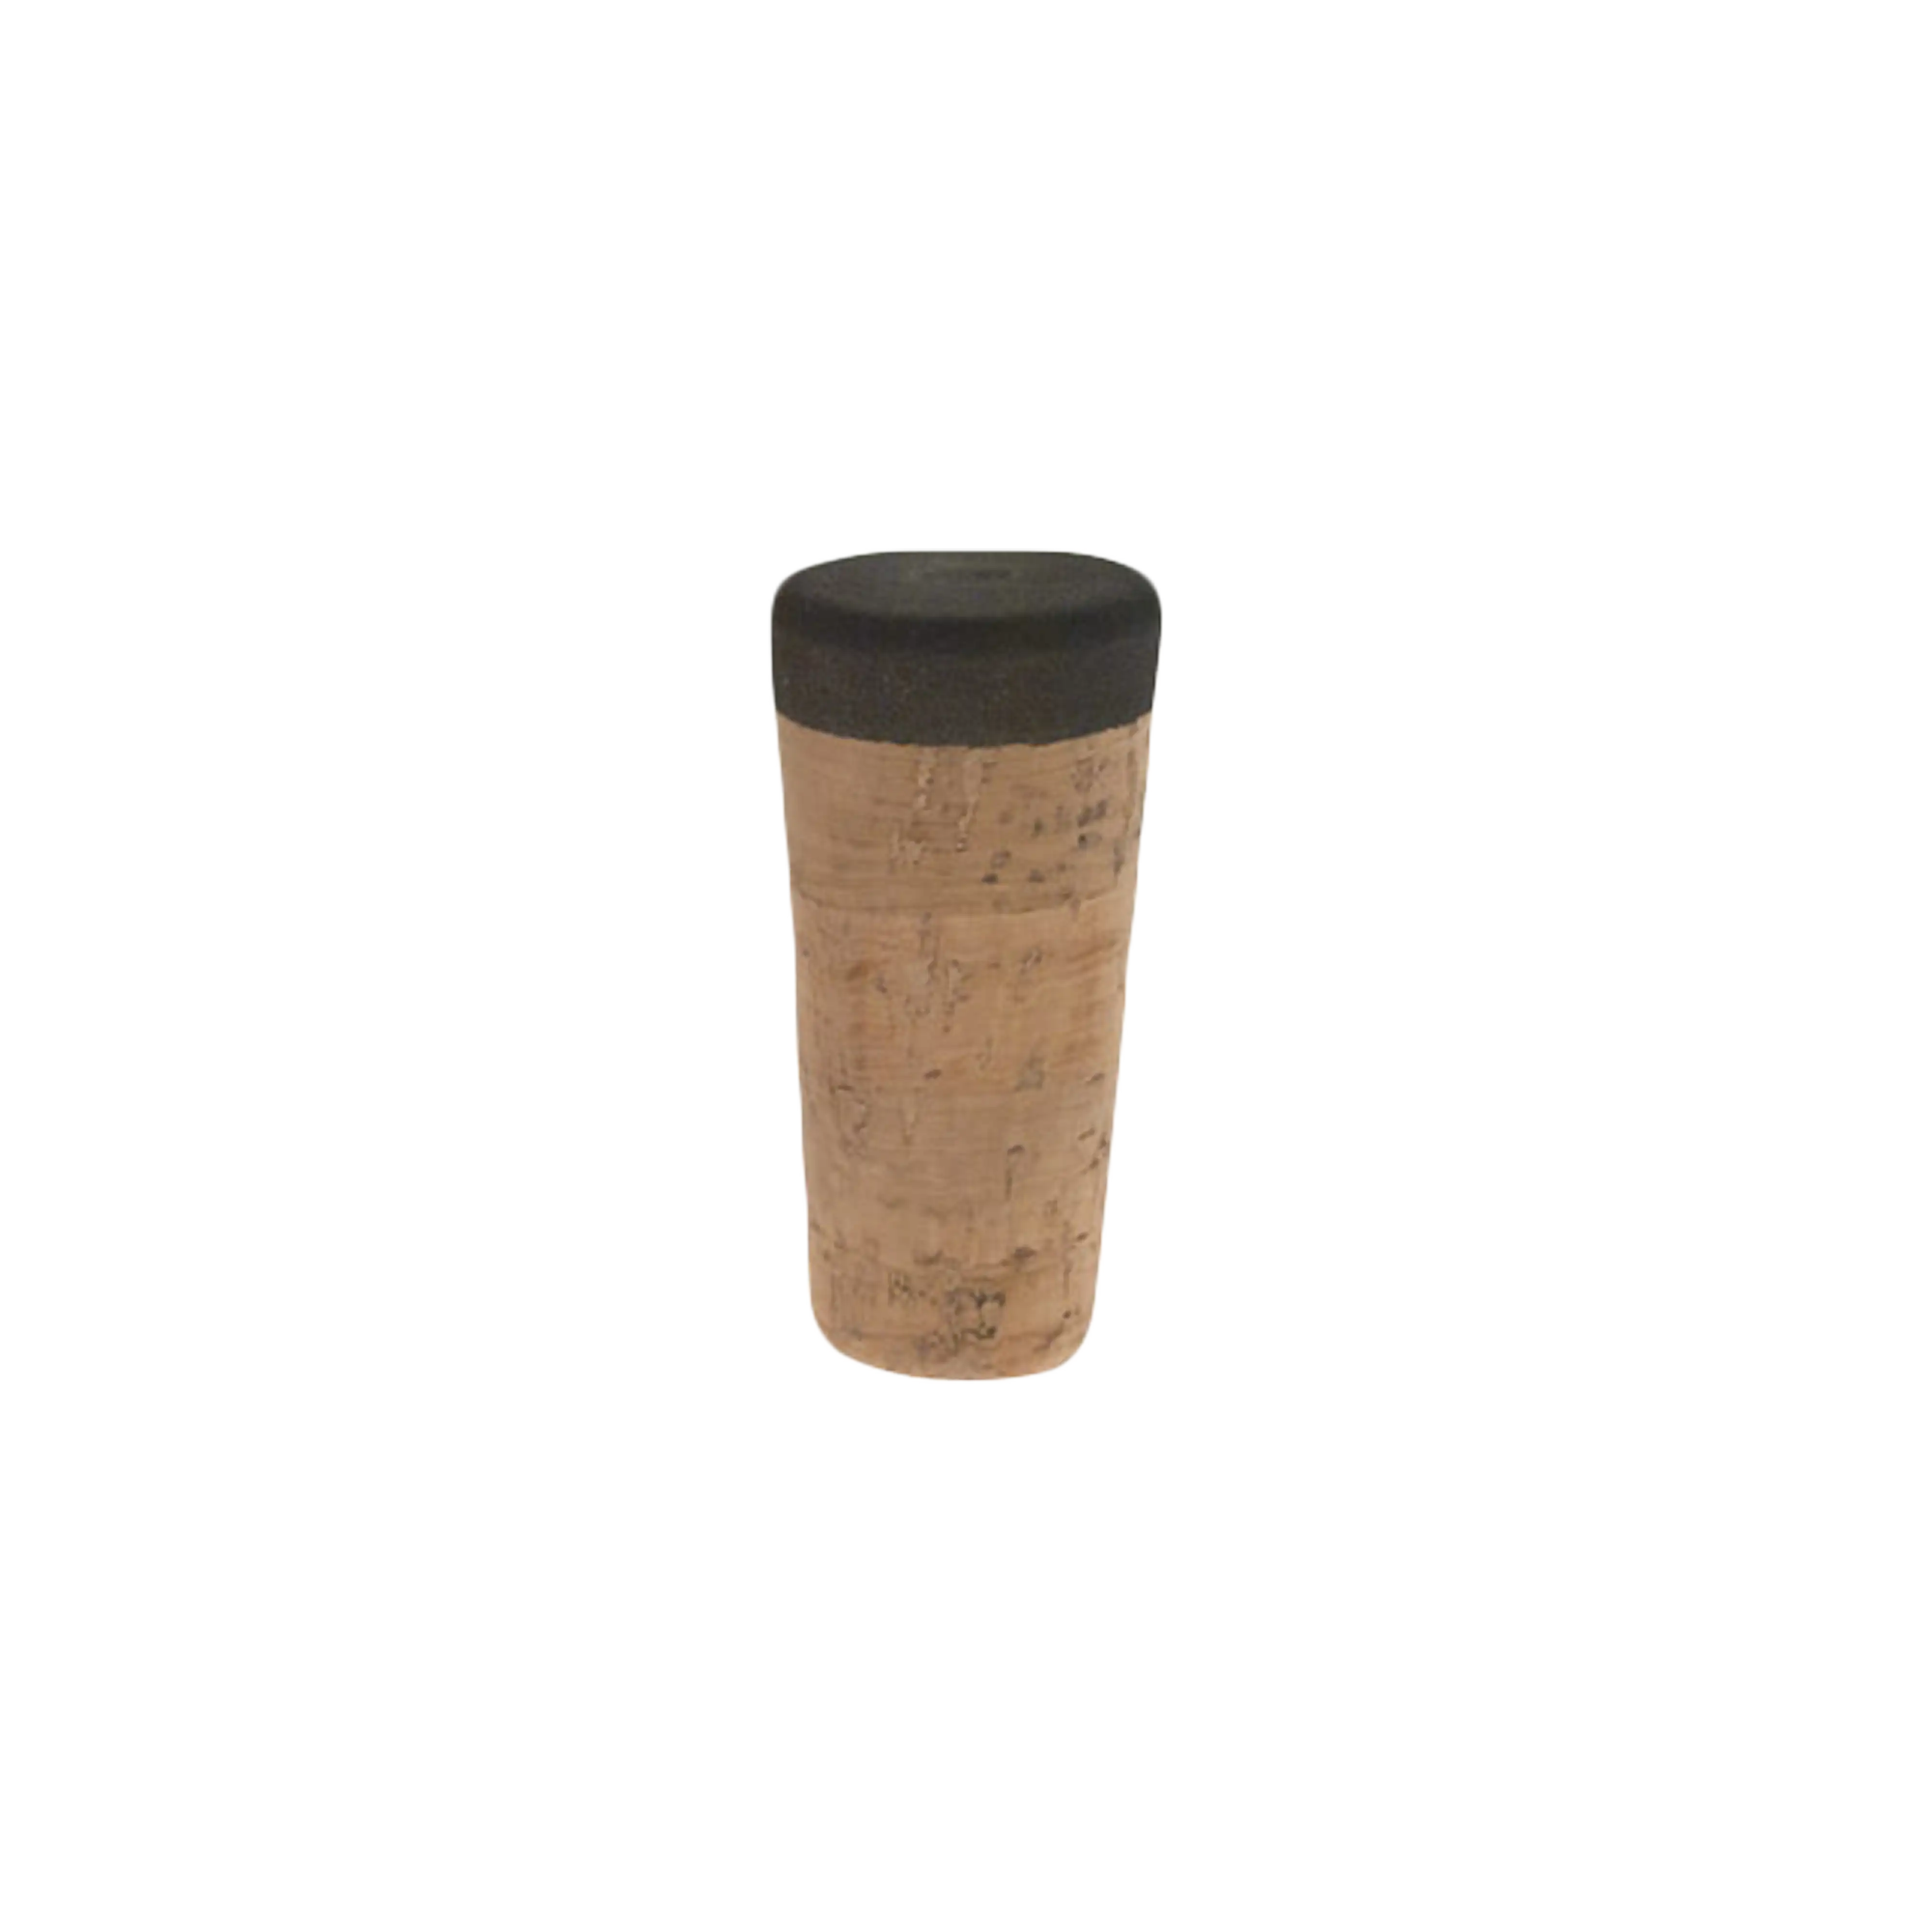 Straight Tapered Cork Split-Grip Fighting Butt - Clearance